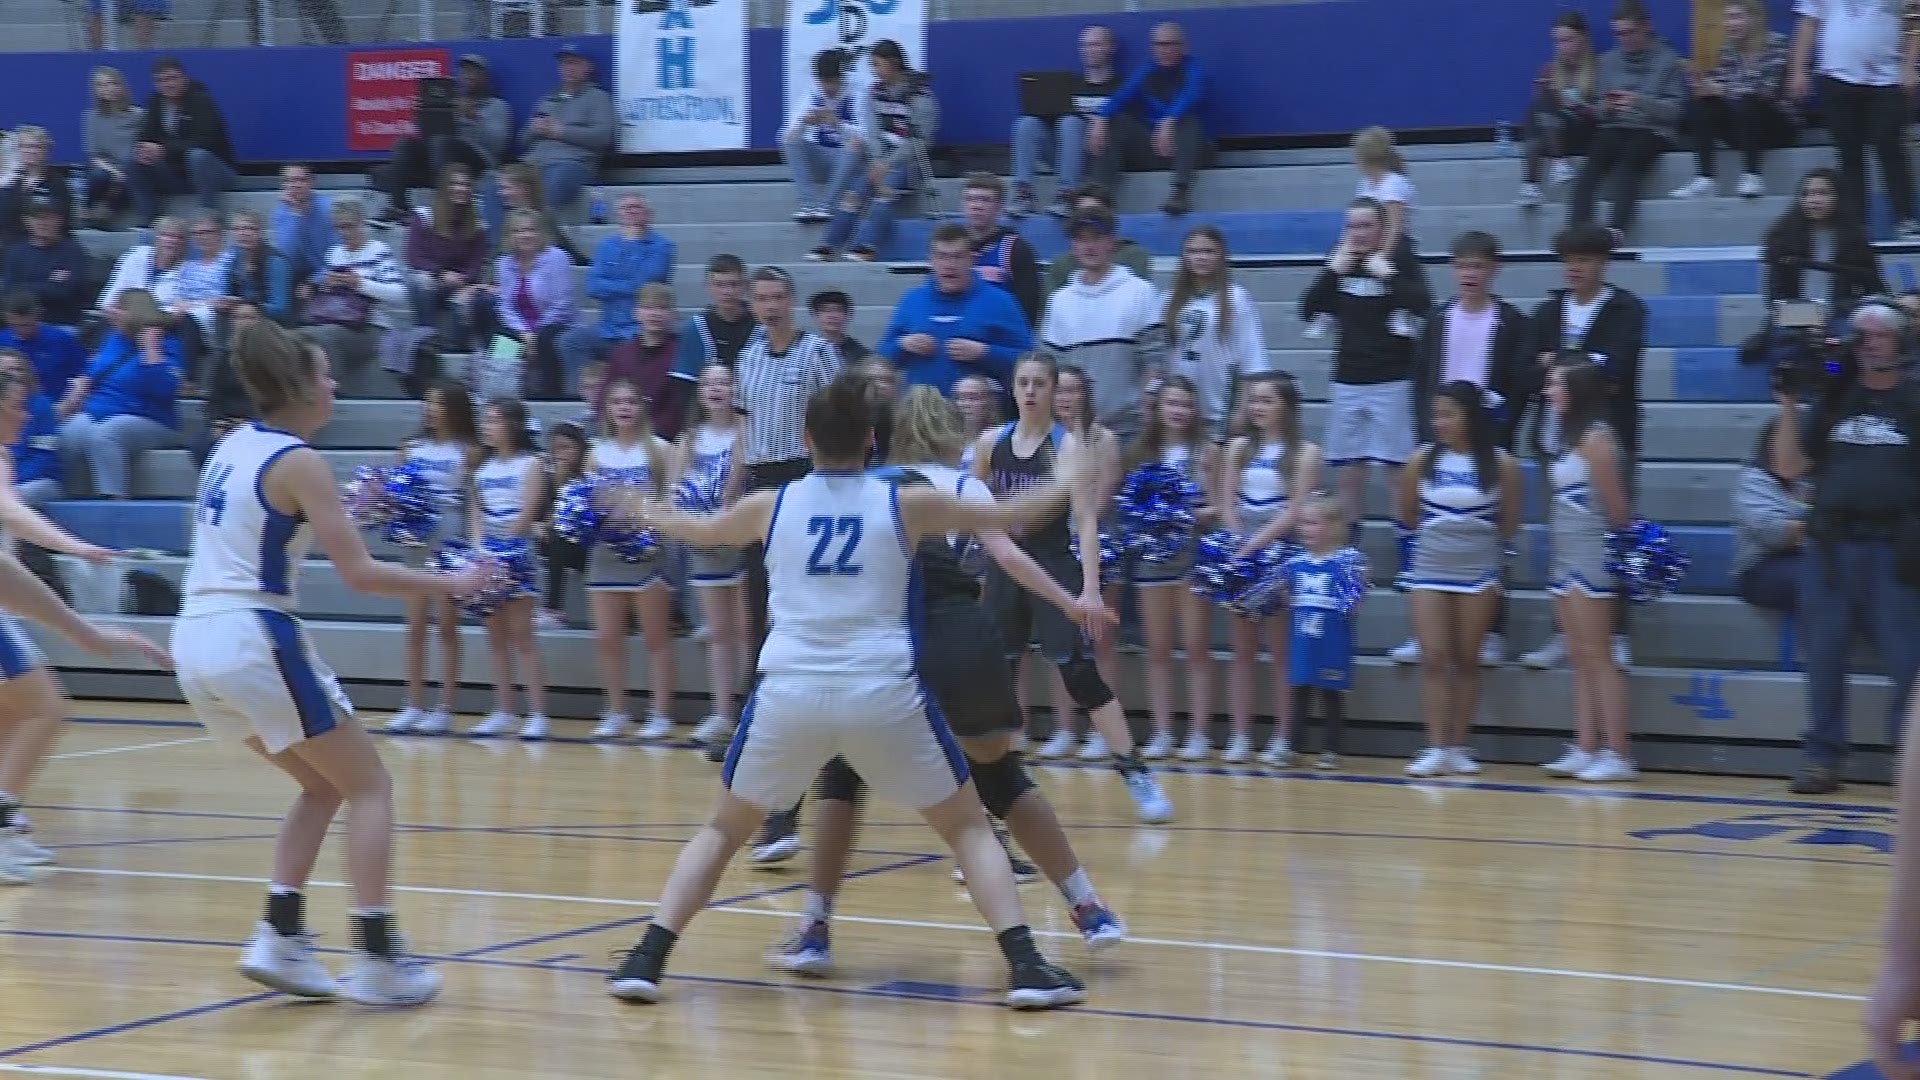 Highlights of No. 8 South Salem's 56-29 win over McNary on Feb. 28, 2020. Highlights are part of KGW's Friday Night Hoops with Orlando Sanchez.